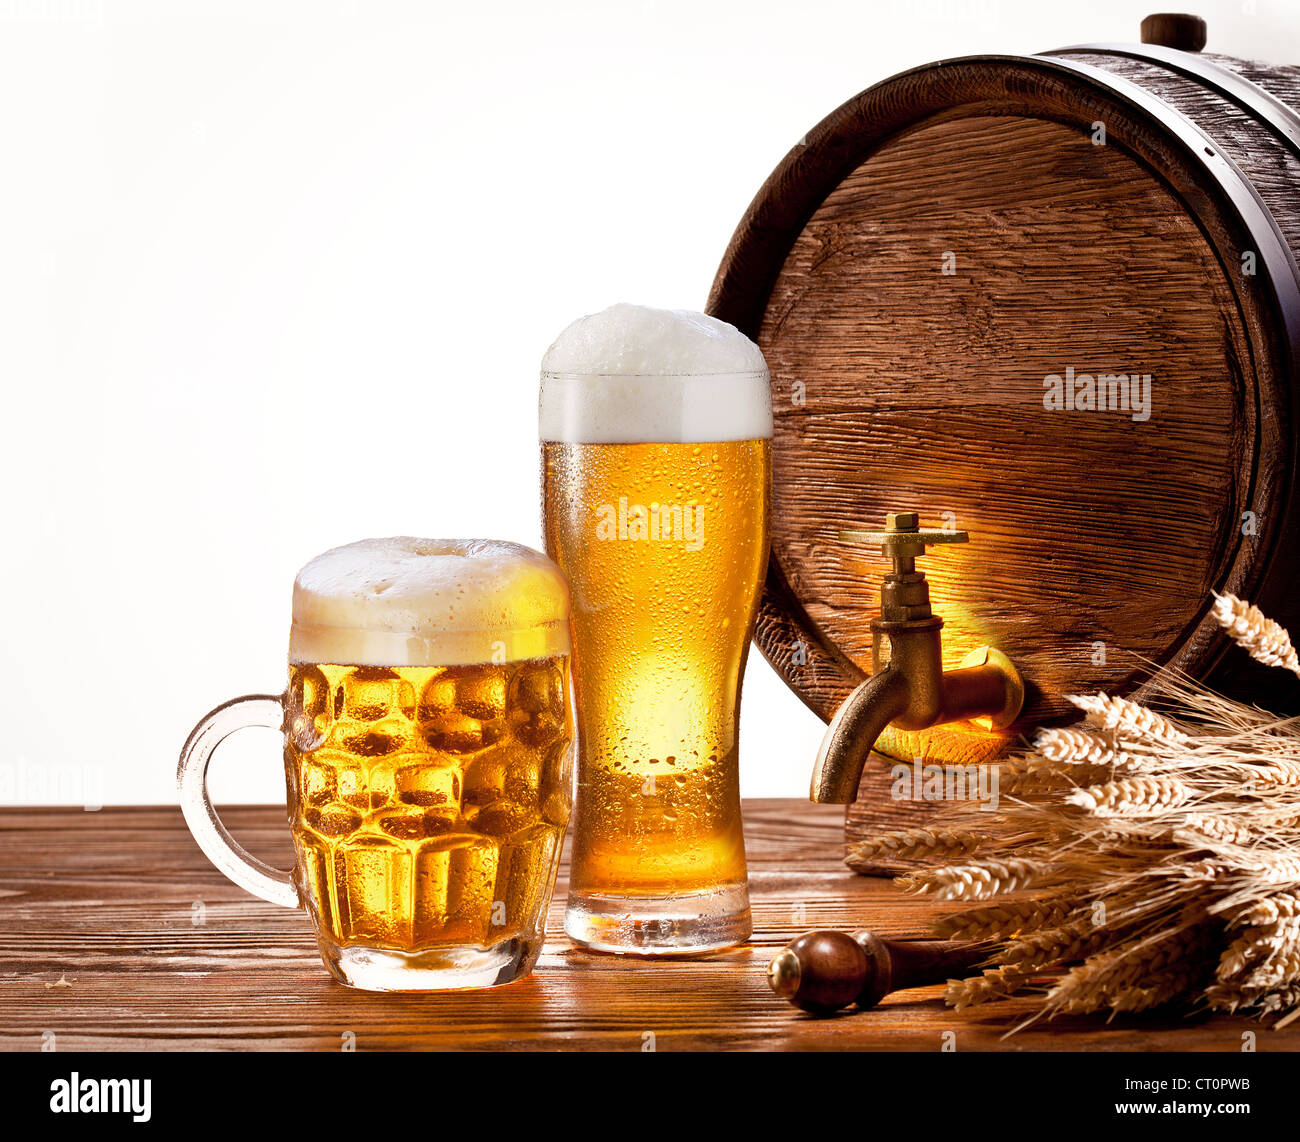 Beer barrel with beer glasses on a wooden table. Isolated on a white background. Stock Photo